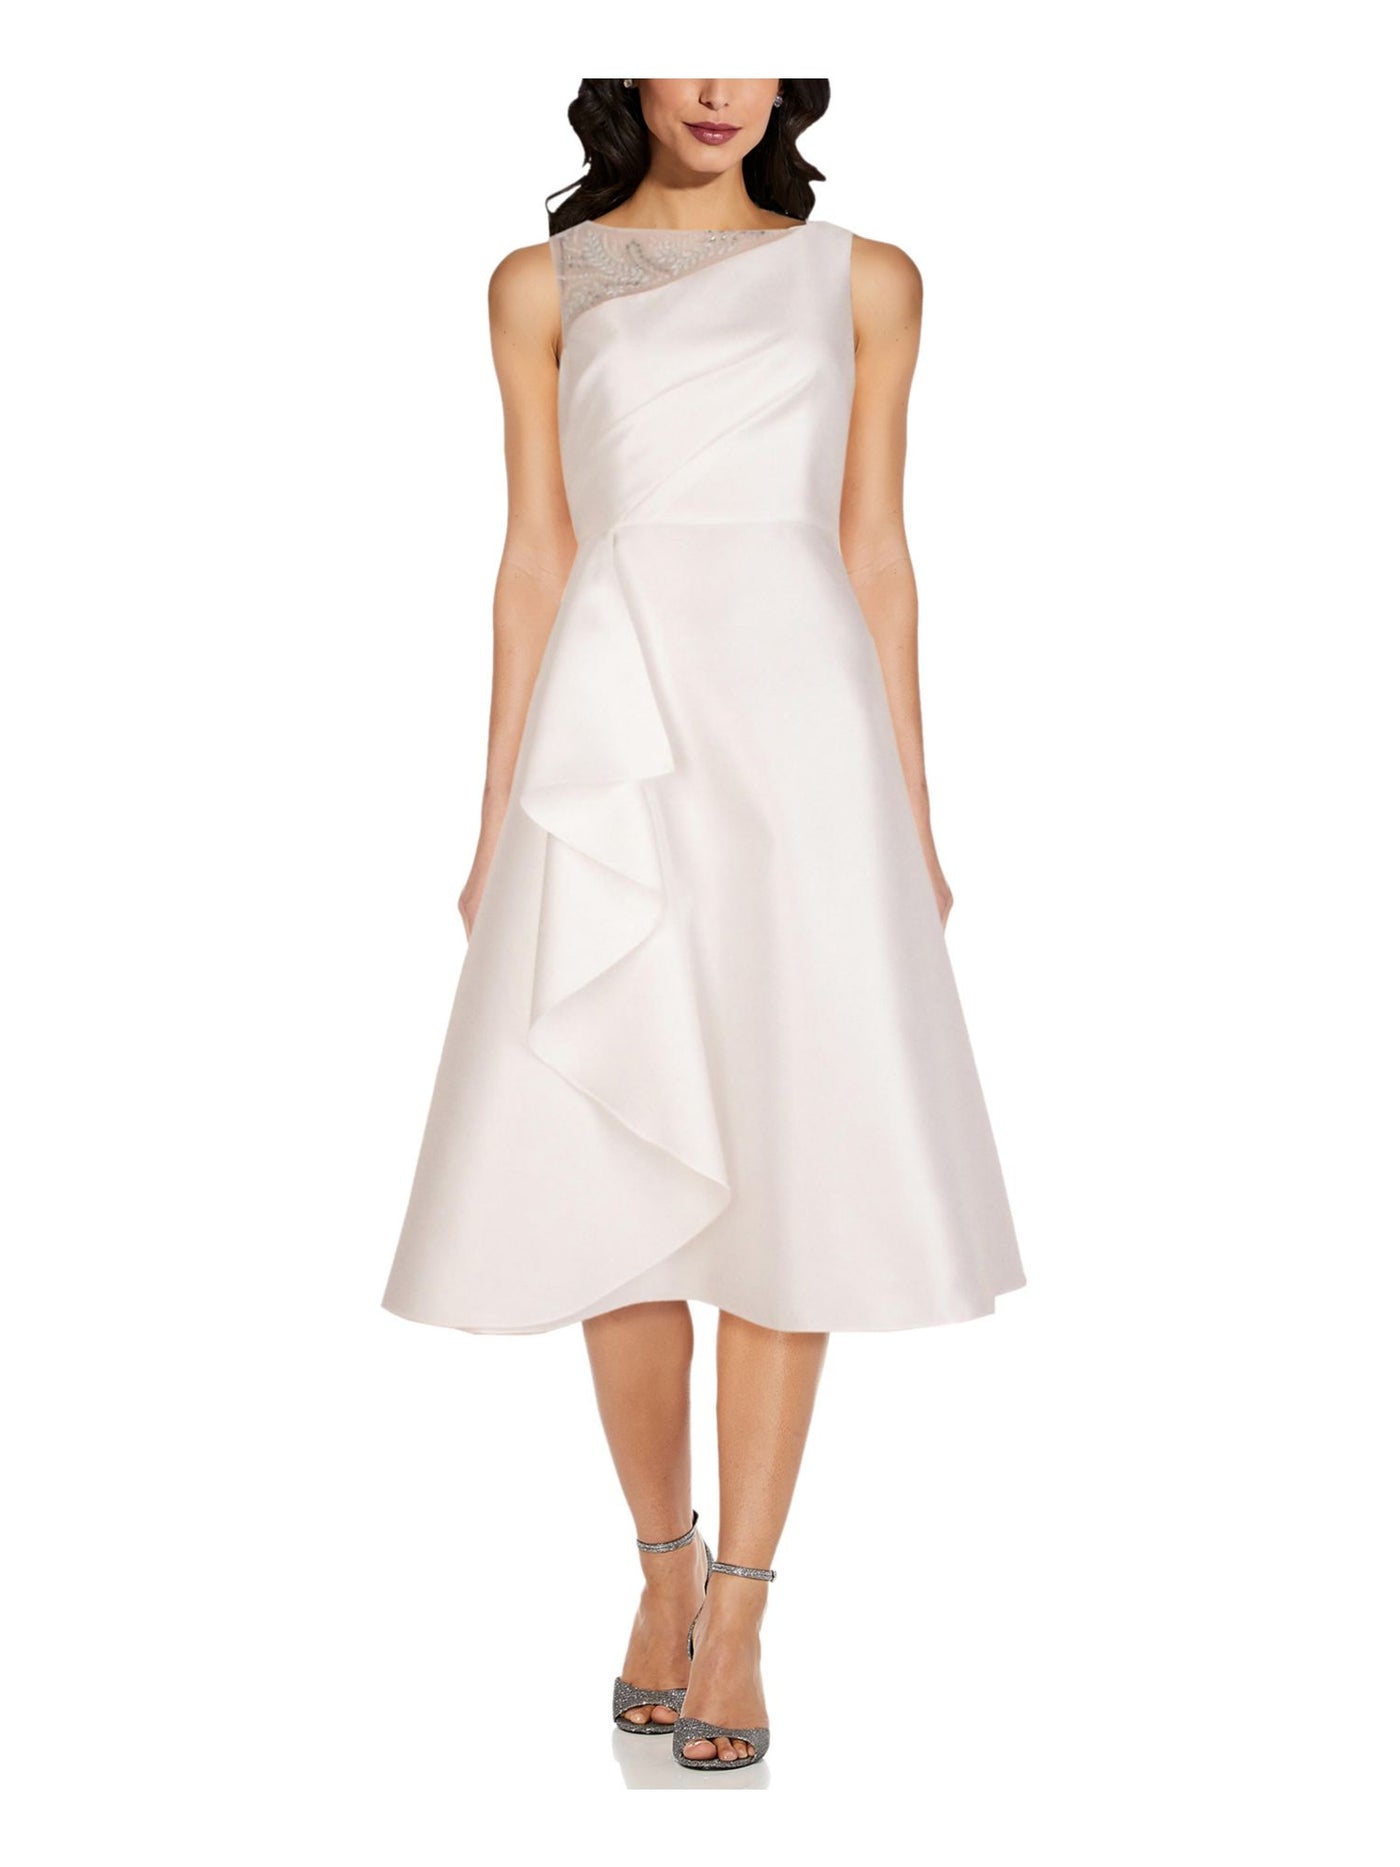 ADRIANNA PAPELL Womens White Embellished Zippered Sleeveless Boat Neck Midi Party A-Line Dress 4